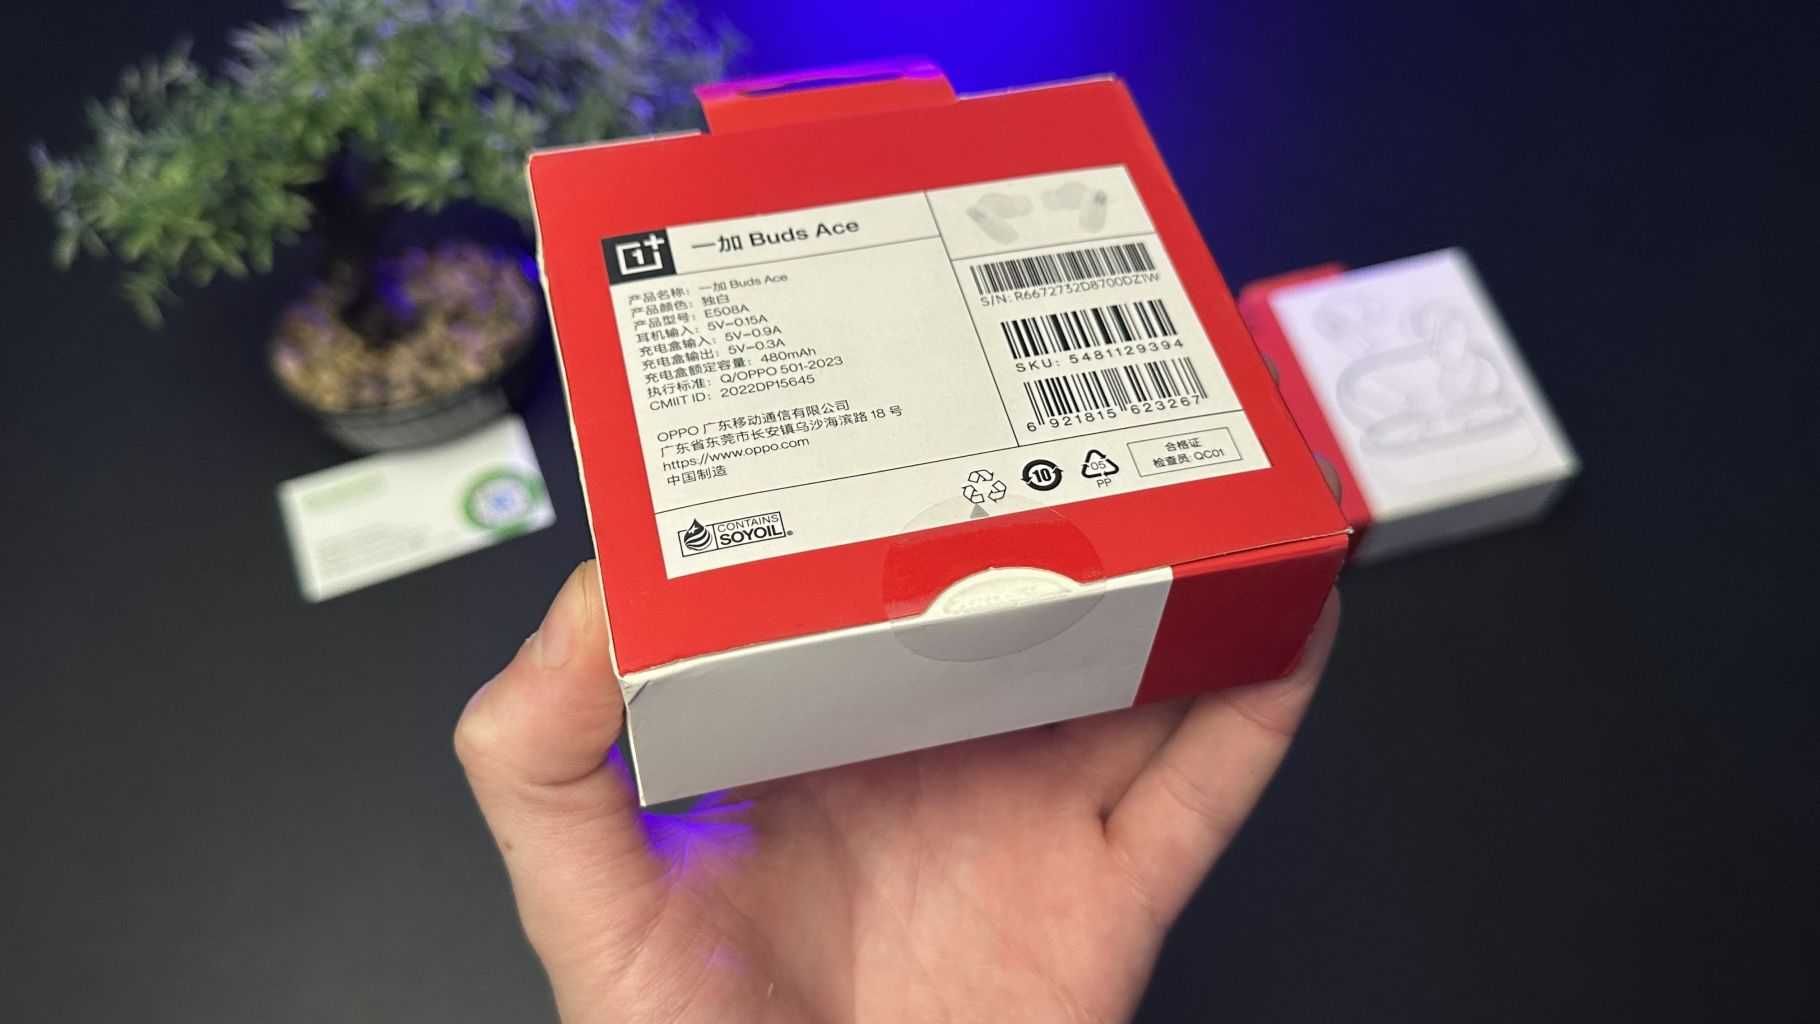 NEW Навушники OnePlus Buds Ace Black/White Гарантія Trade In